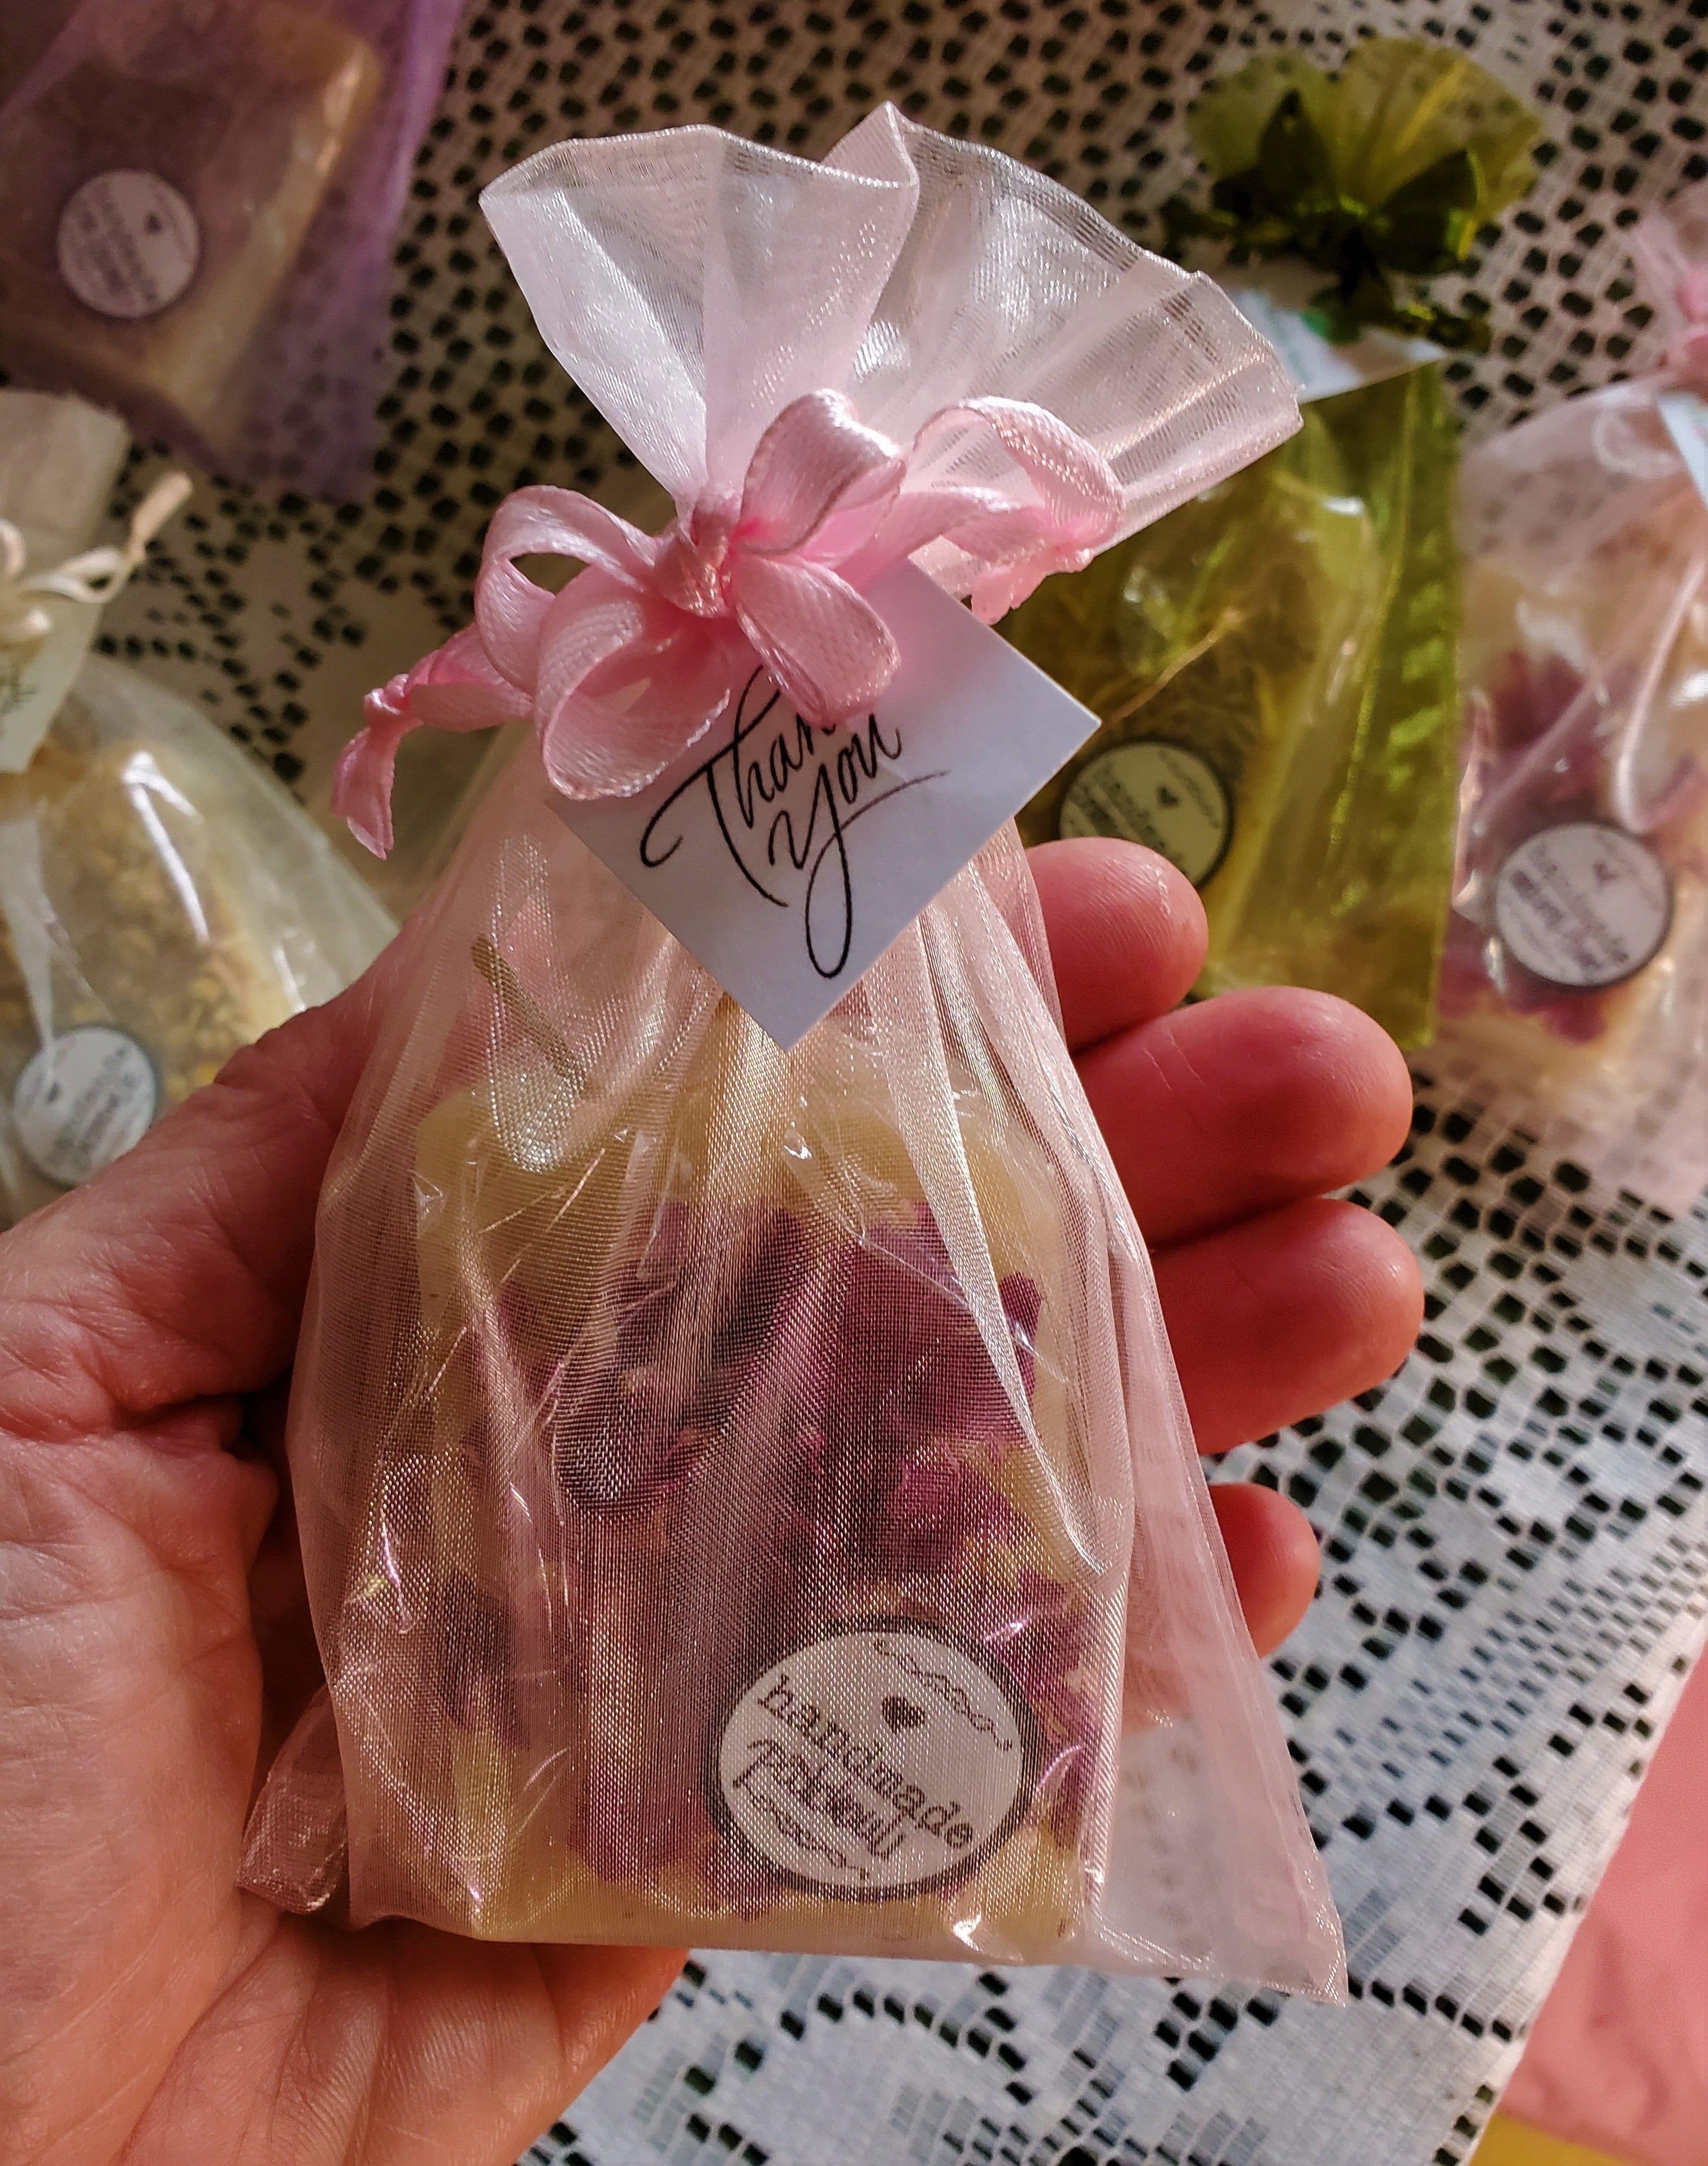 We make reasonably priced handmade all natural soap favours in Canada for bridal showers, wedding day, baby showers, birthdays, celebrations and special events.